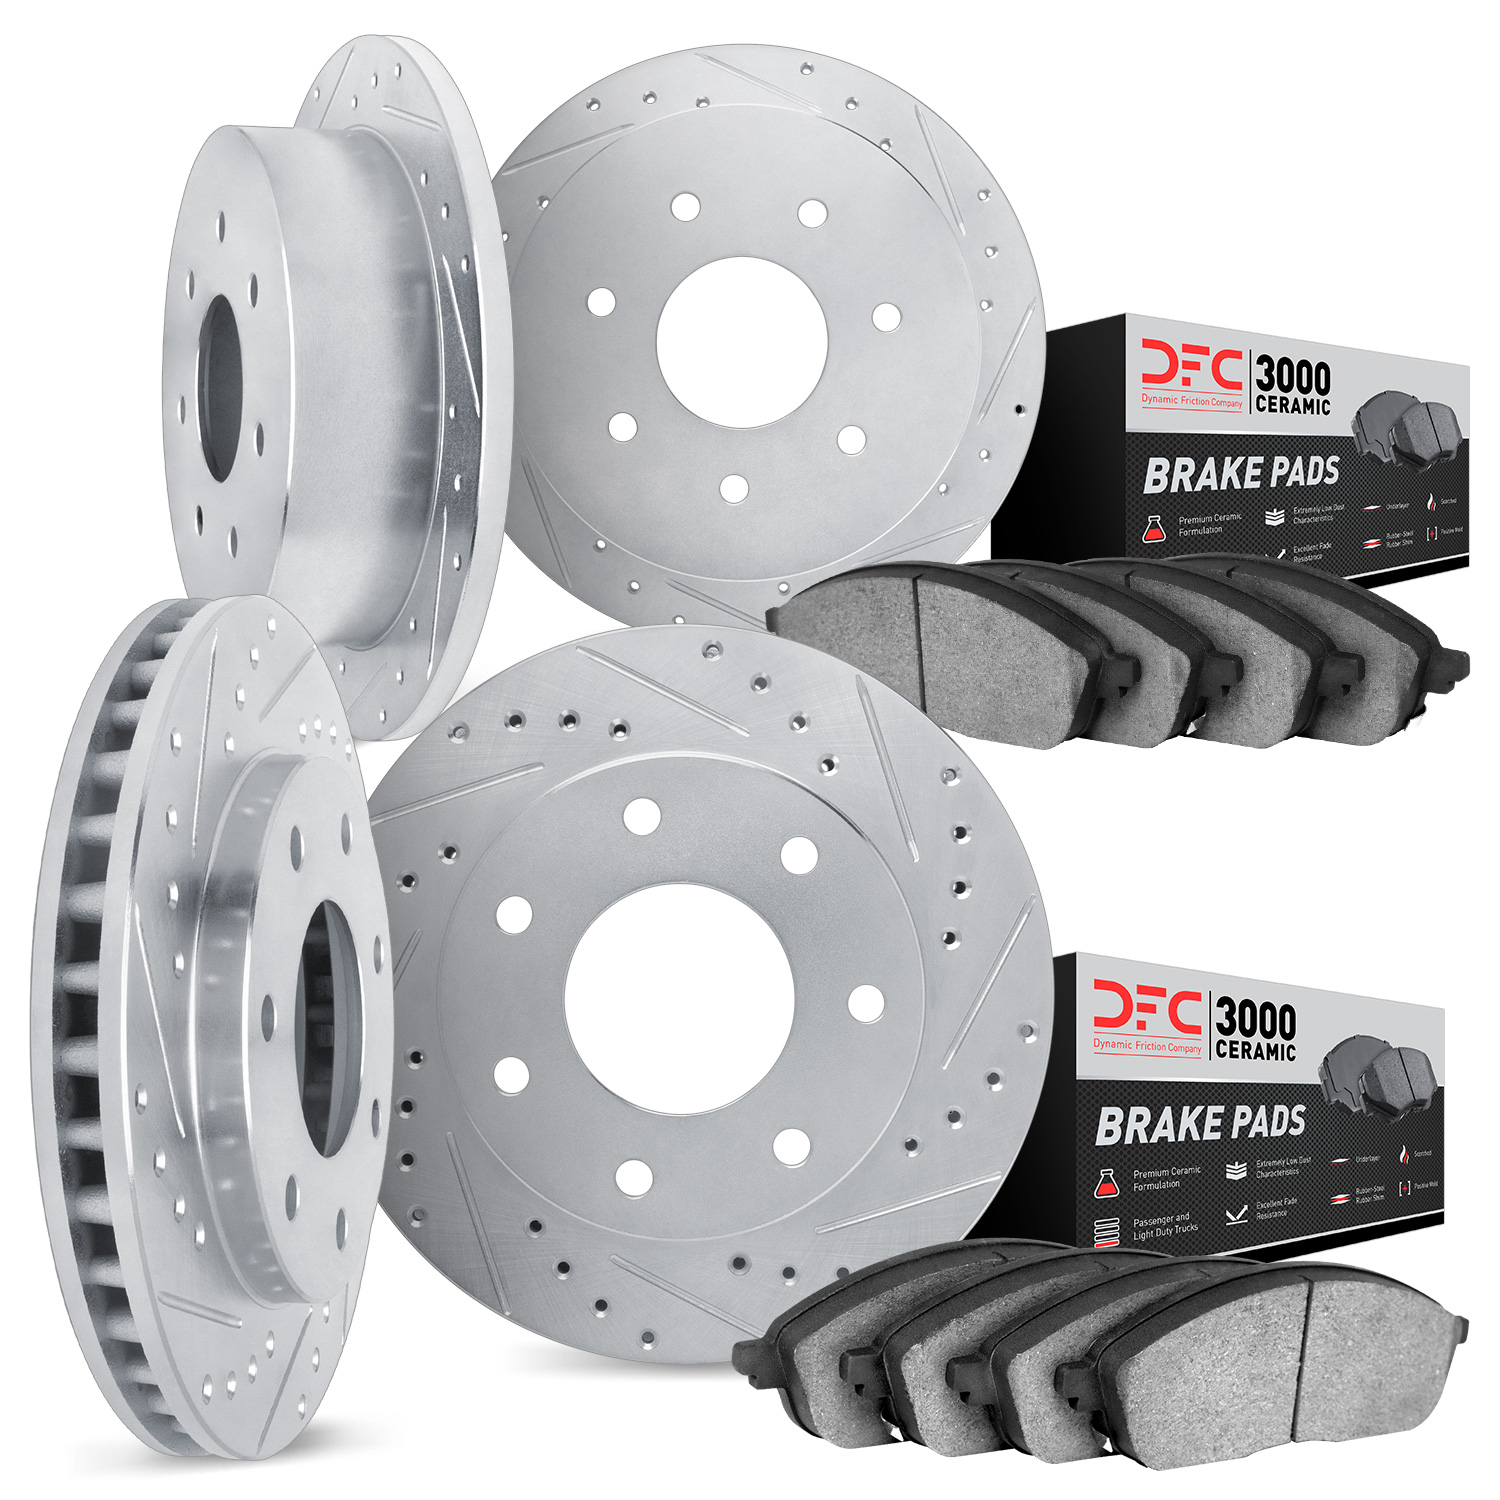 7304-54032 Drilled/Slotted Brake Rotor with 3000-Series Ceramic Brake Pads Kit [Silver], 1997-2004 Ford/Lincoln/Mercury/Mazda, P